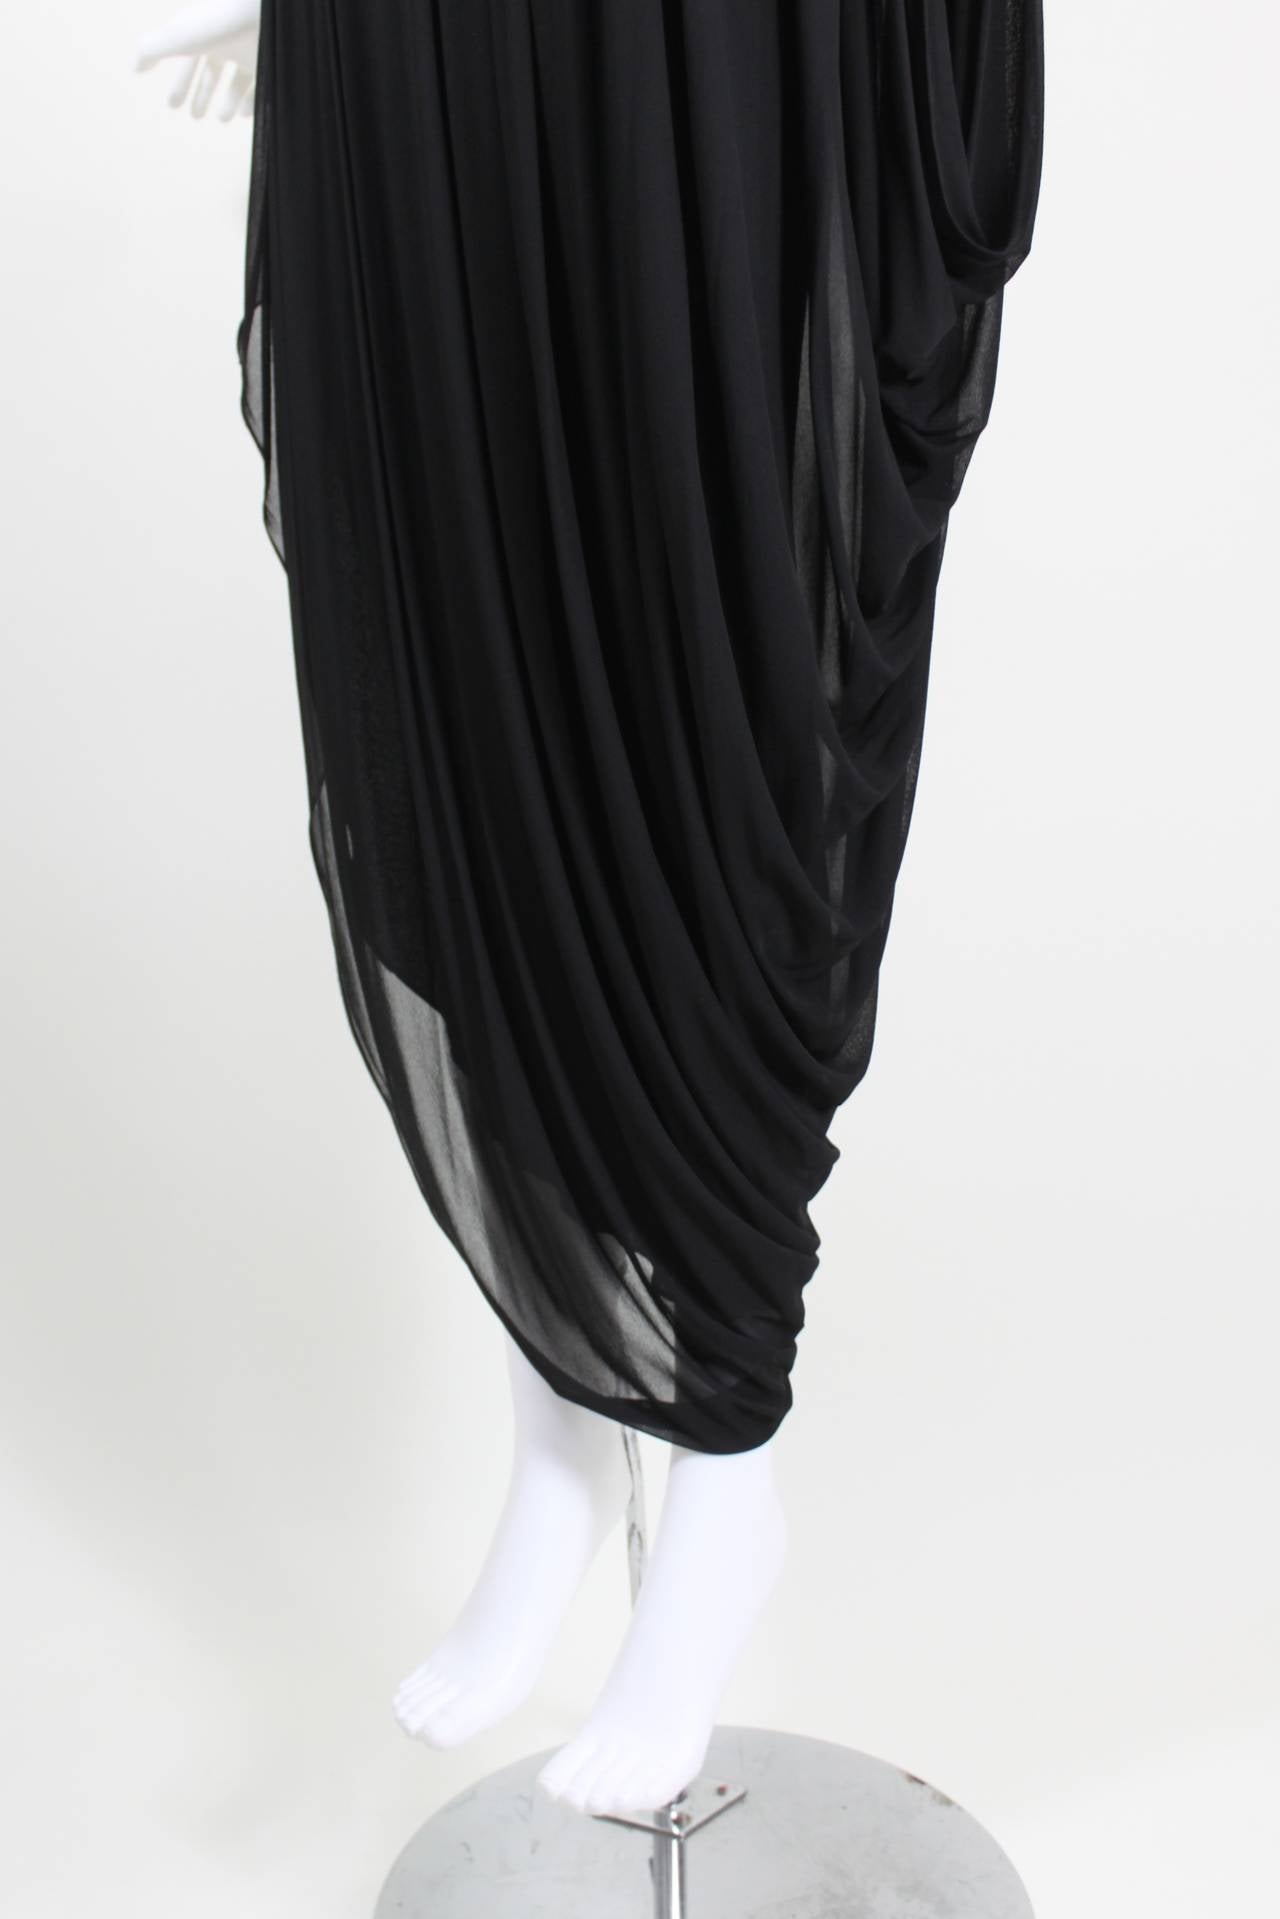 A fabulous evening dress from Bob Mackie. Luxe black jersey is draped along an asymmetrical seam, allowing for a cocoon hem. A white and silver beaded tulip accents the bodice.

-Zips in back
-Fully lined

Measurements--
Bust: 36